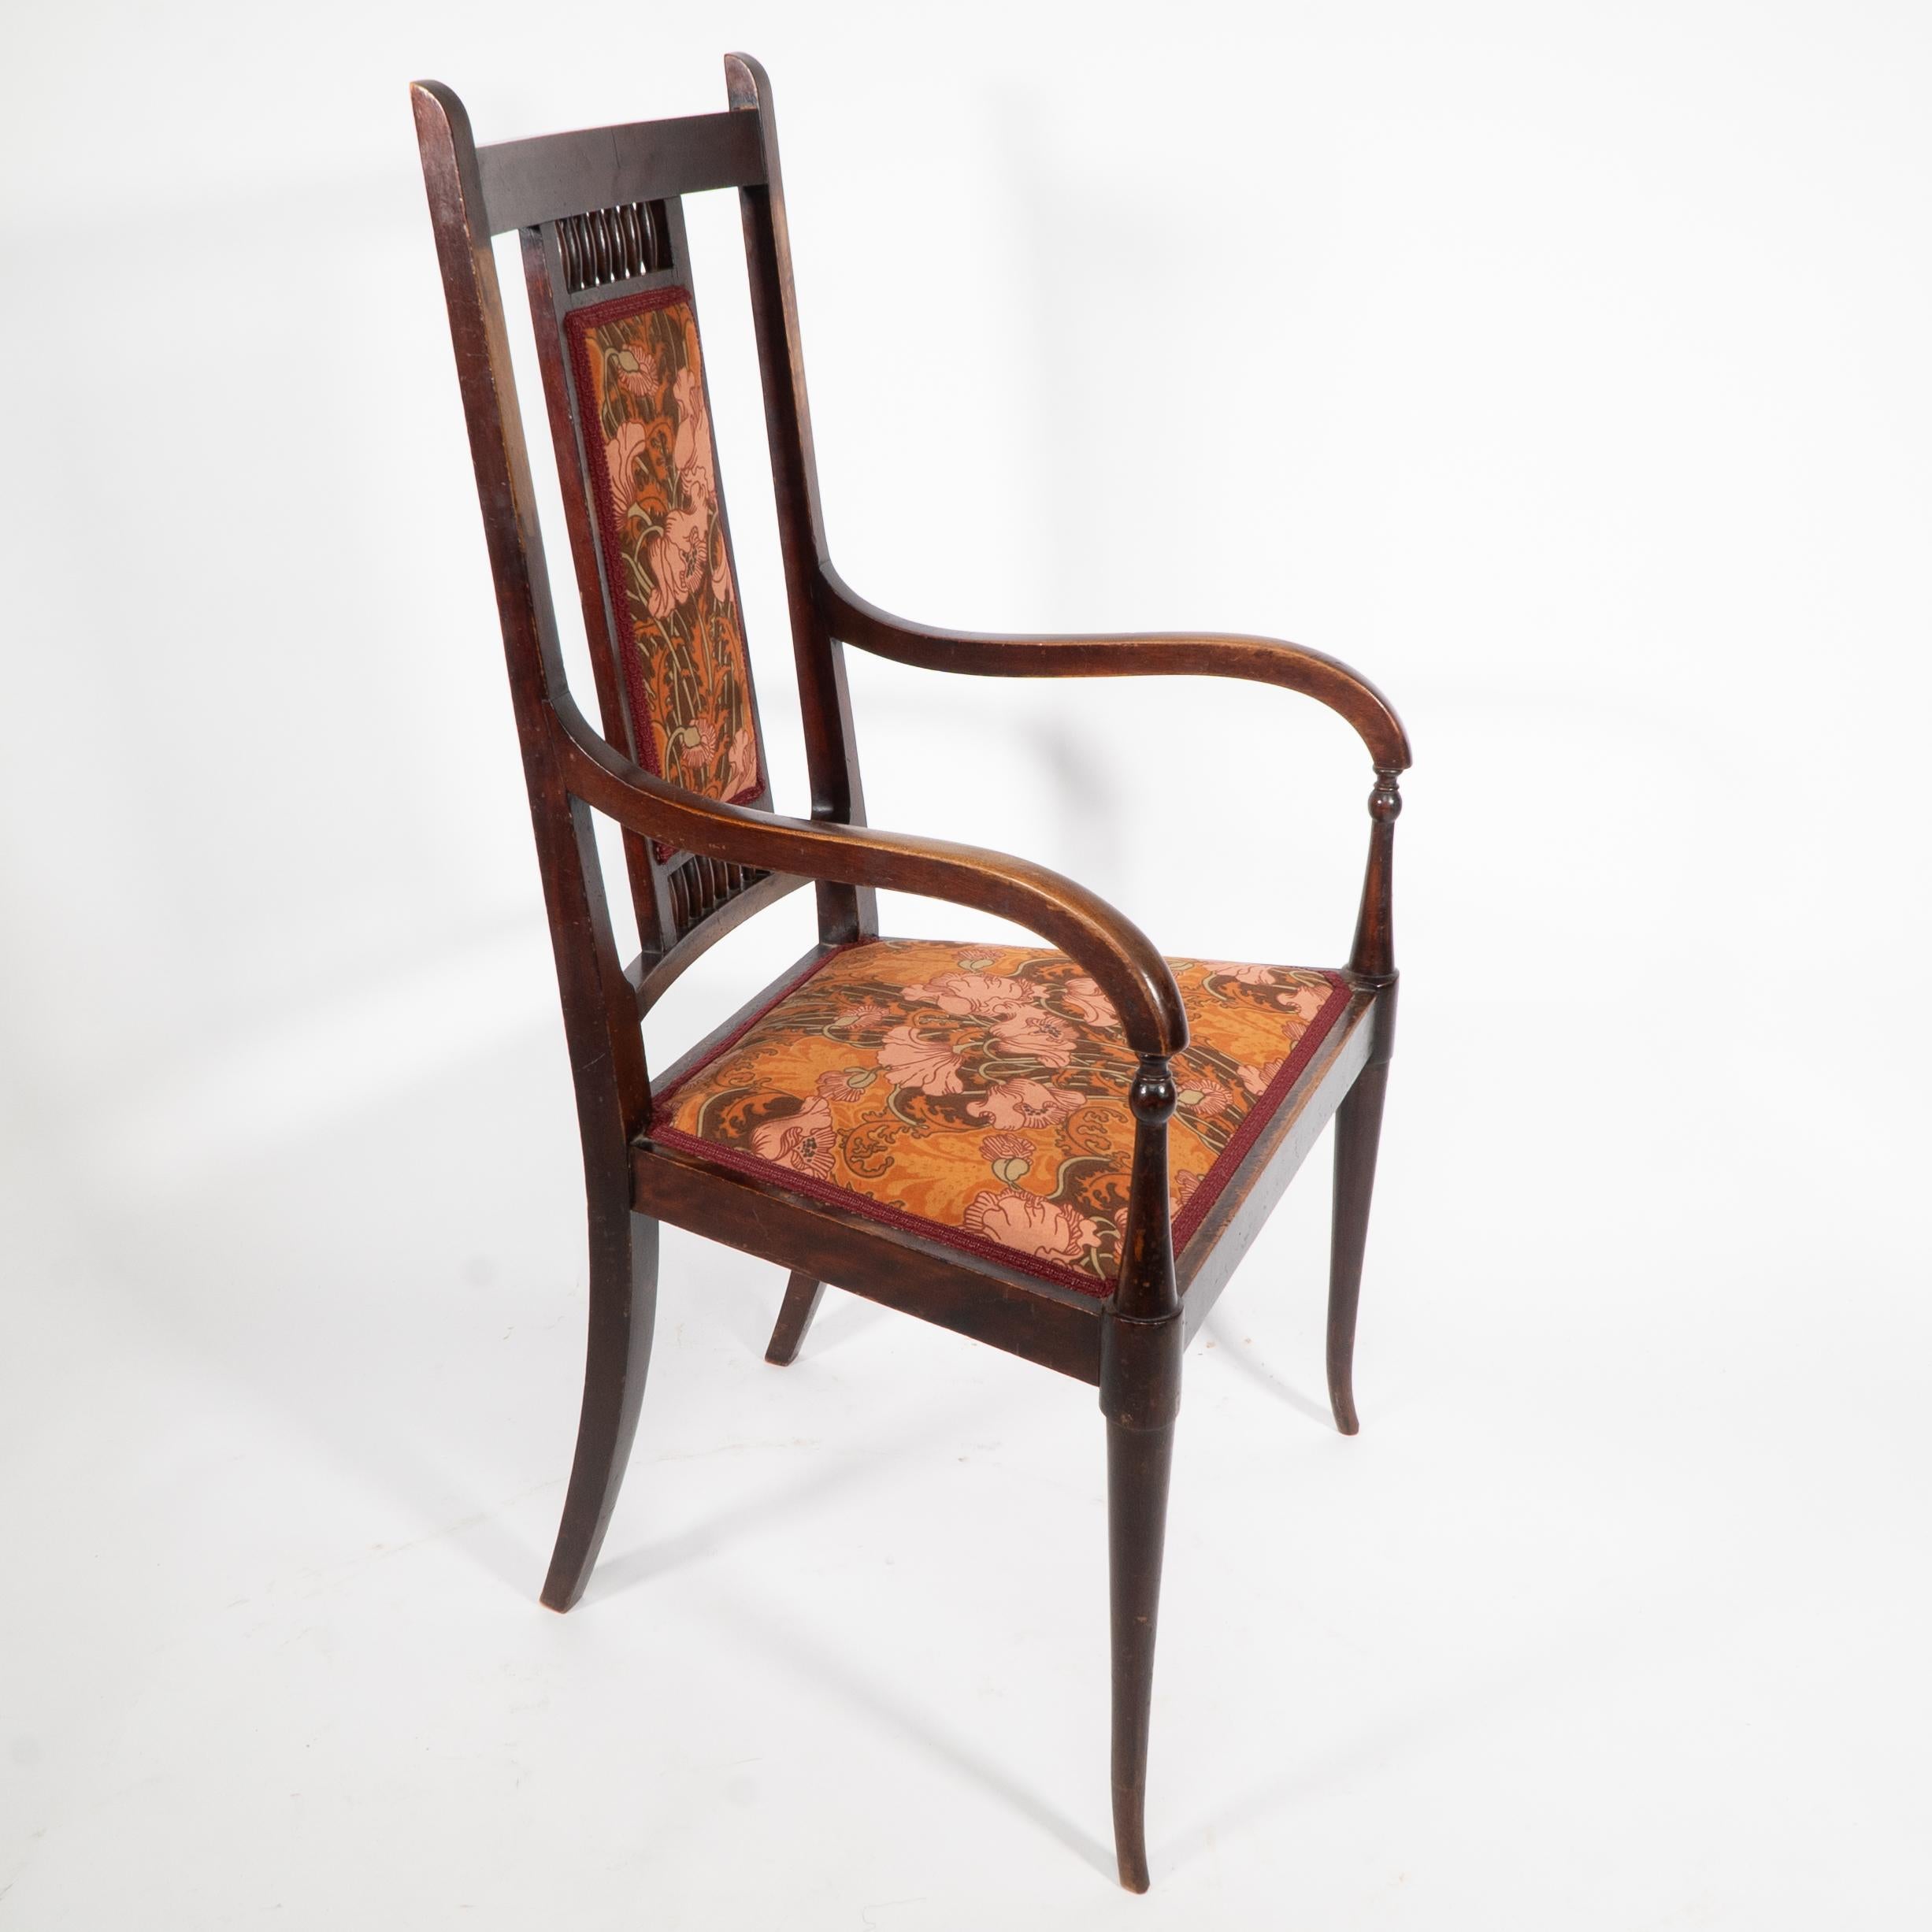 Late 19th Century George Walton for John Rowntree's cafe. An Arts and Crafts walnut armchair For Sale